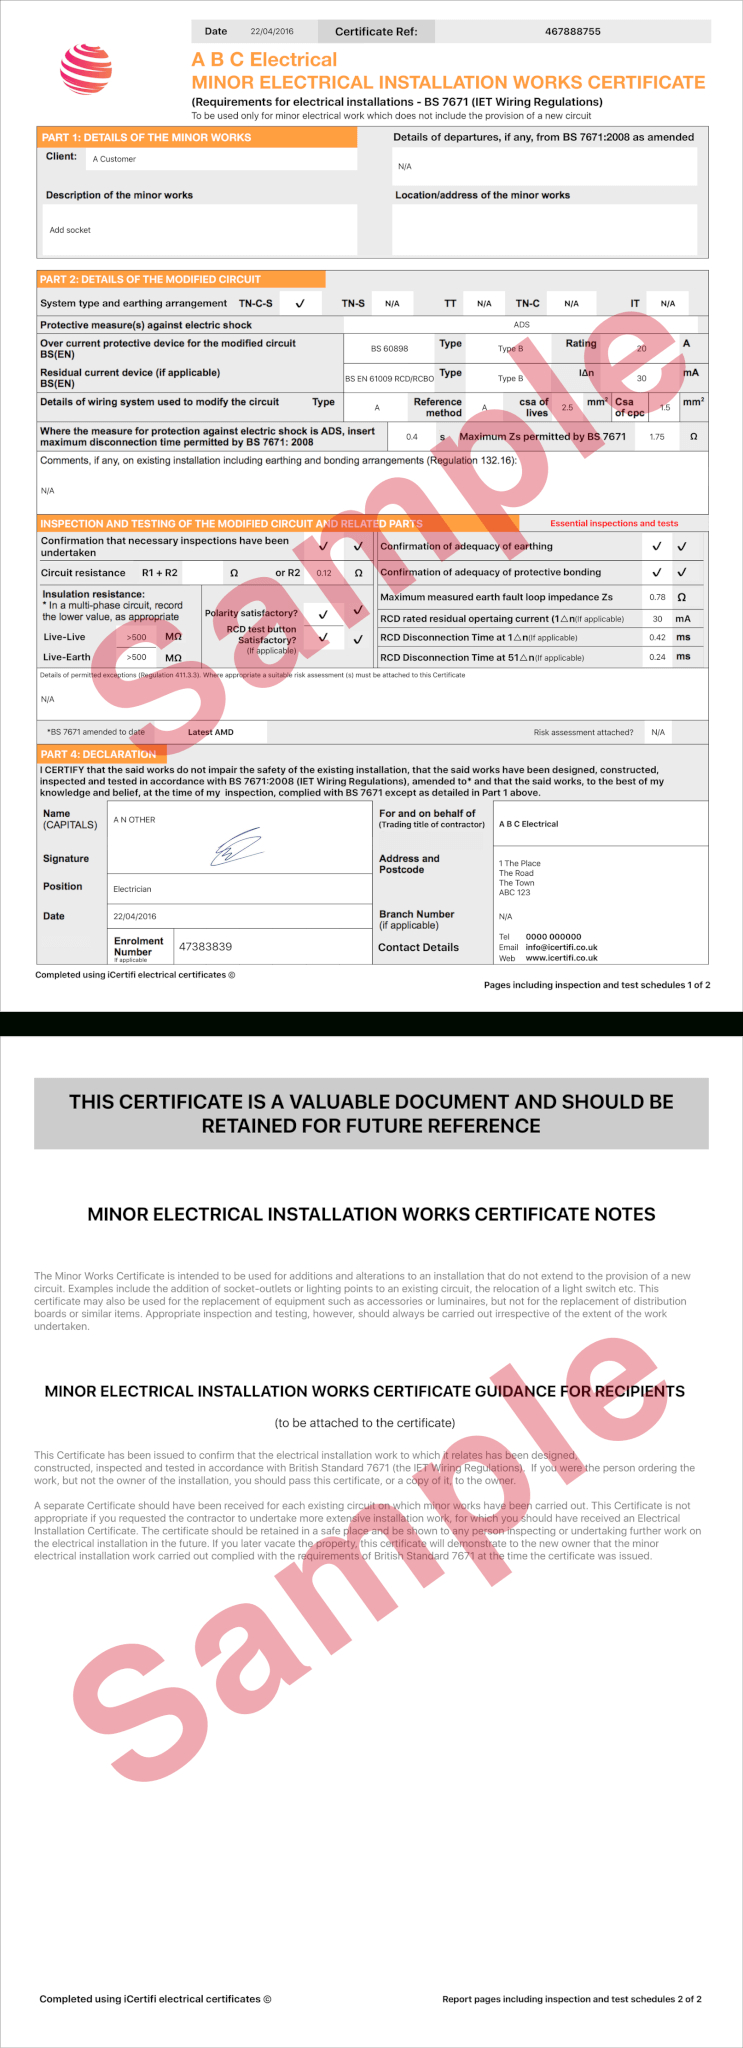 Electrical Certificate – Example Minor Works Certificate With Minor Electrical Installation Works Certificate Template